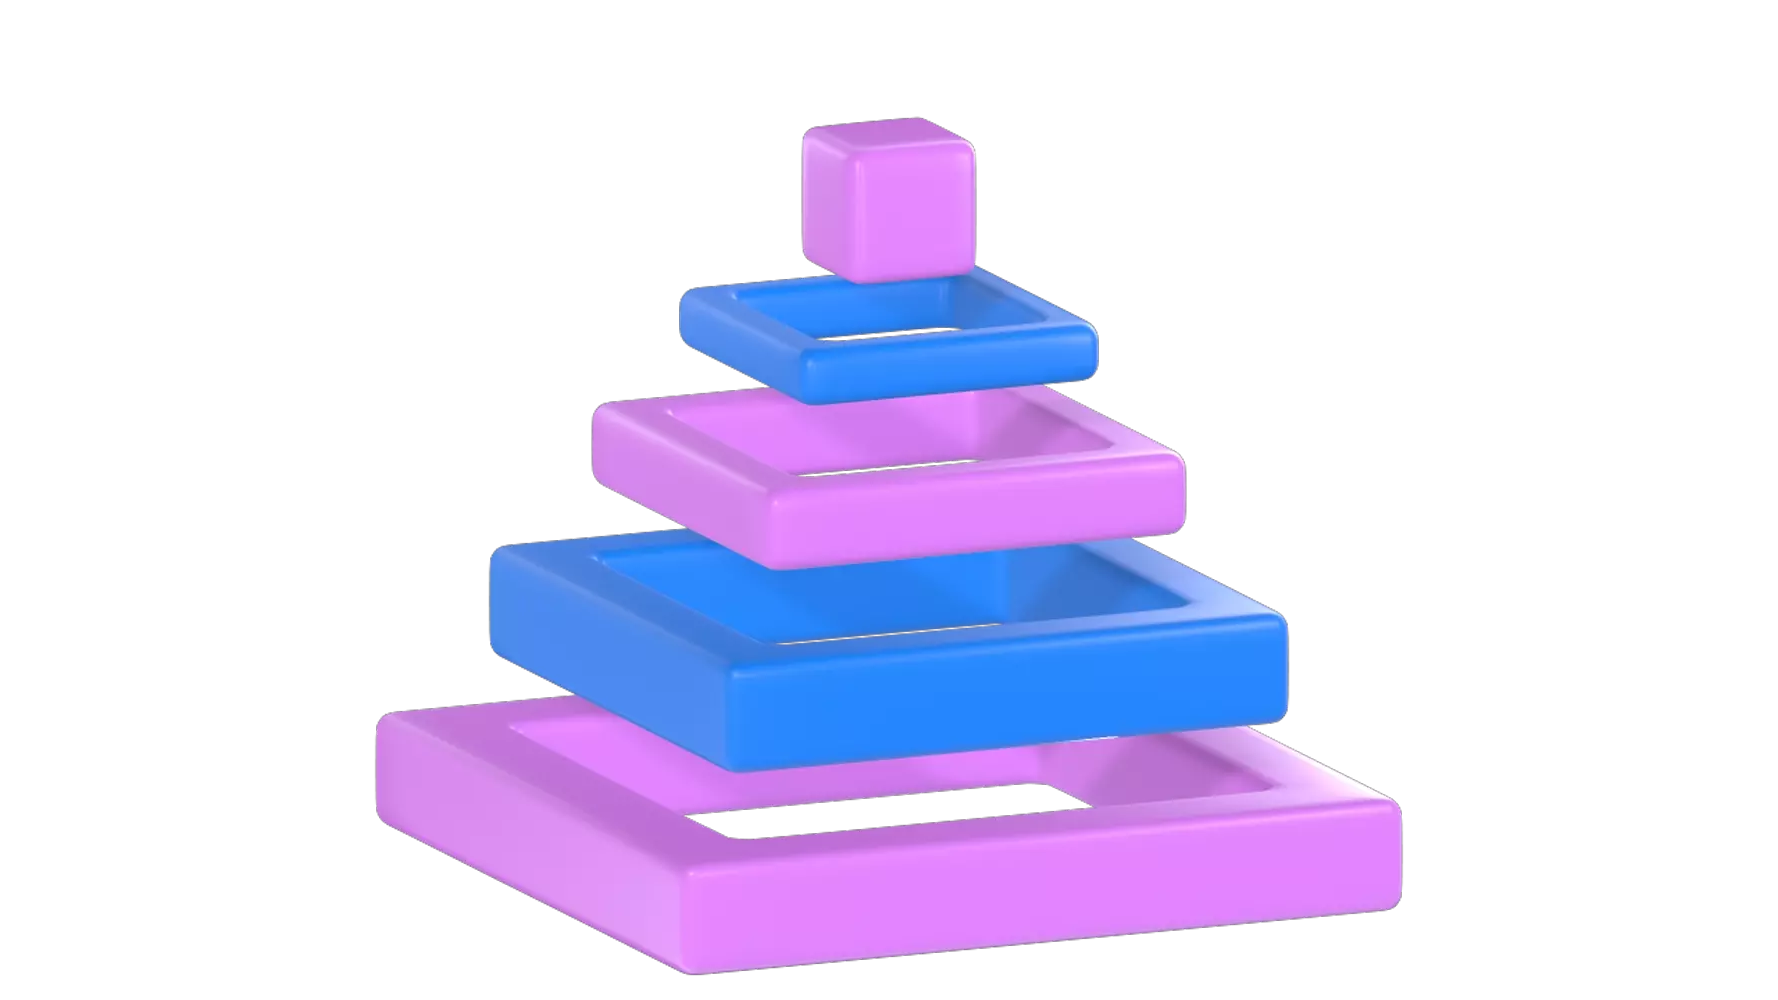 Truncated Pyramid 3D Graphic